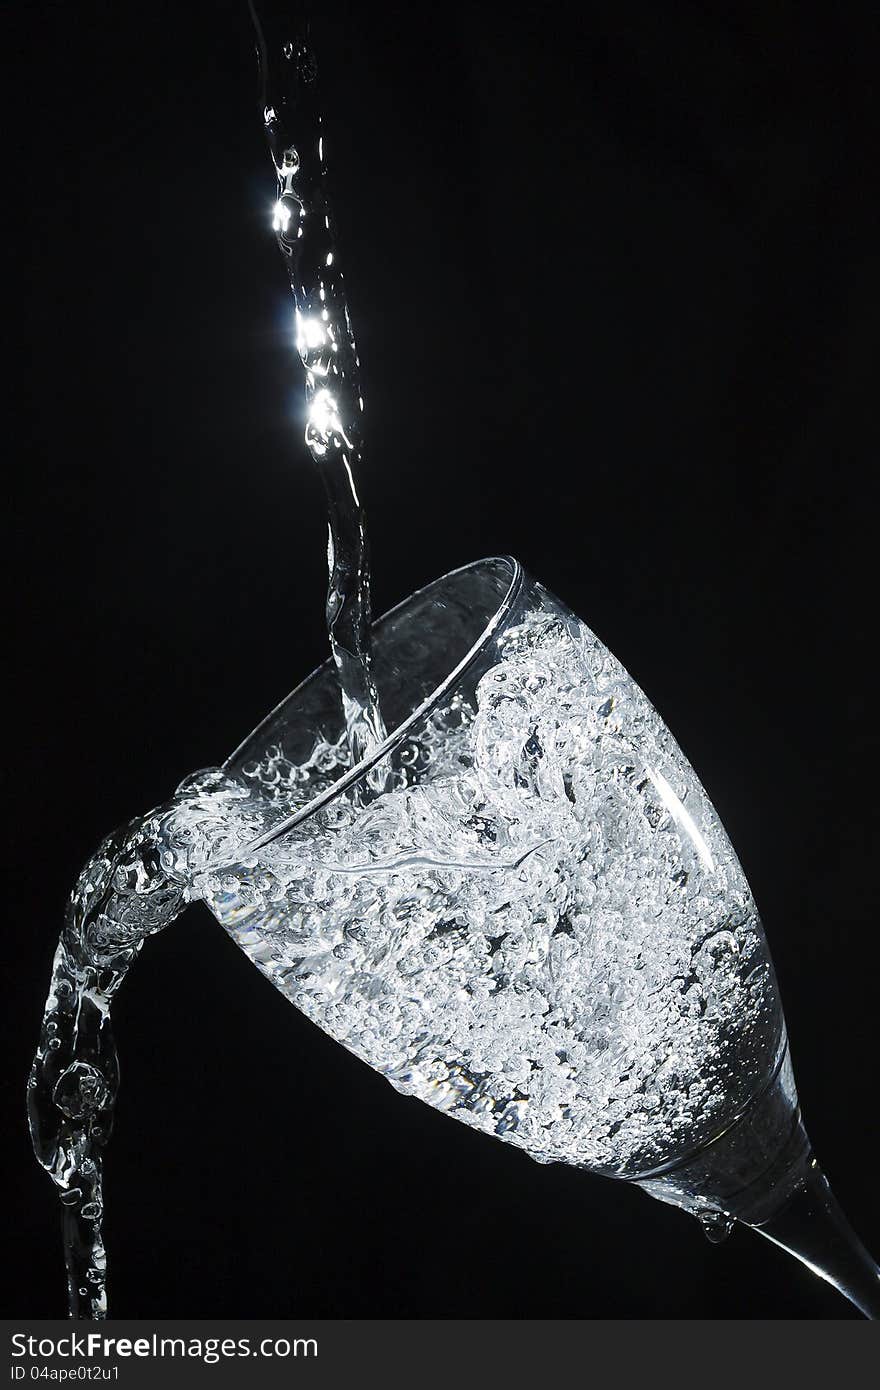 Sparkling water pouring into glass against a black background. Sparkling water pouring into glass against a black background